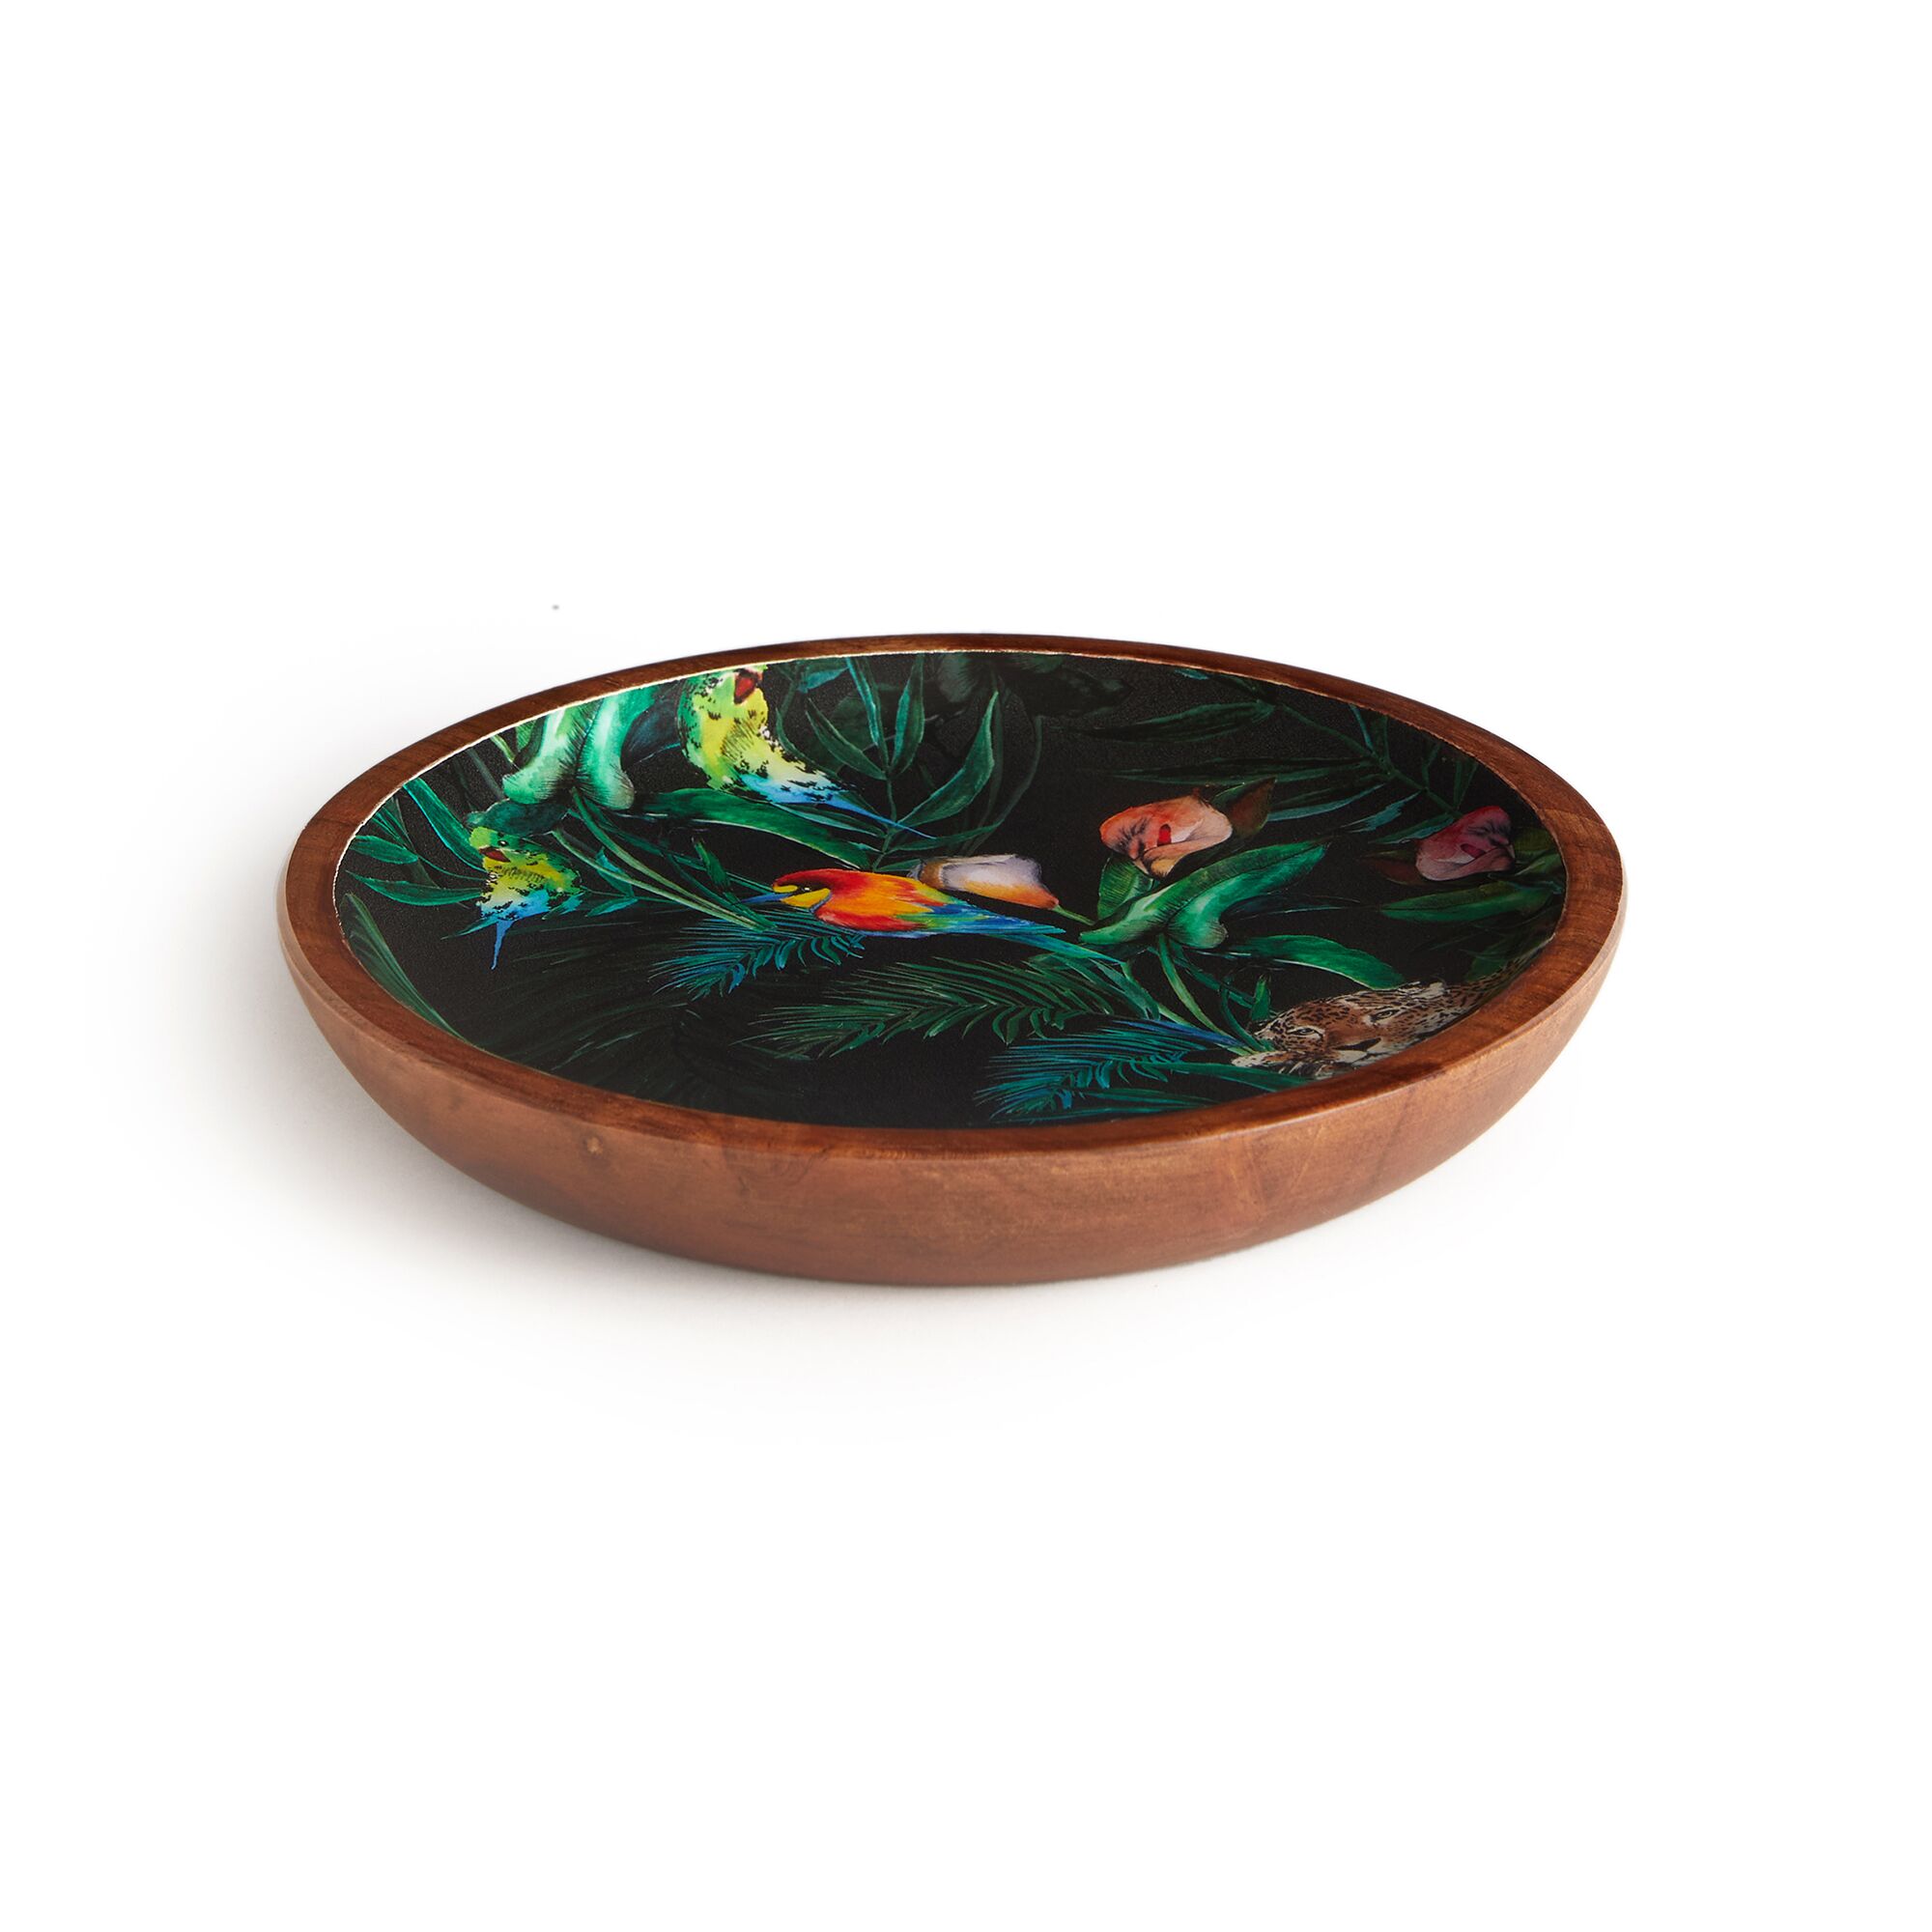 Decorative trinket dish from the Los Angeles fashion and lifestyle label Johnny Was